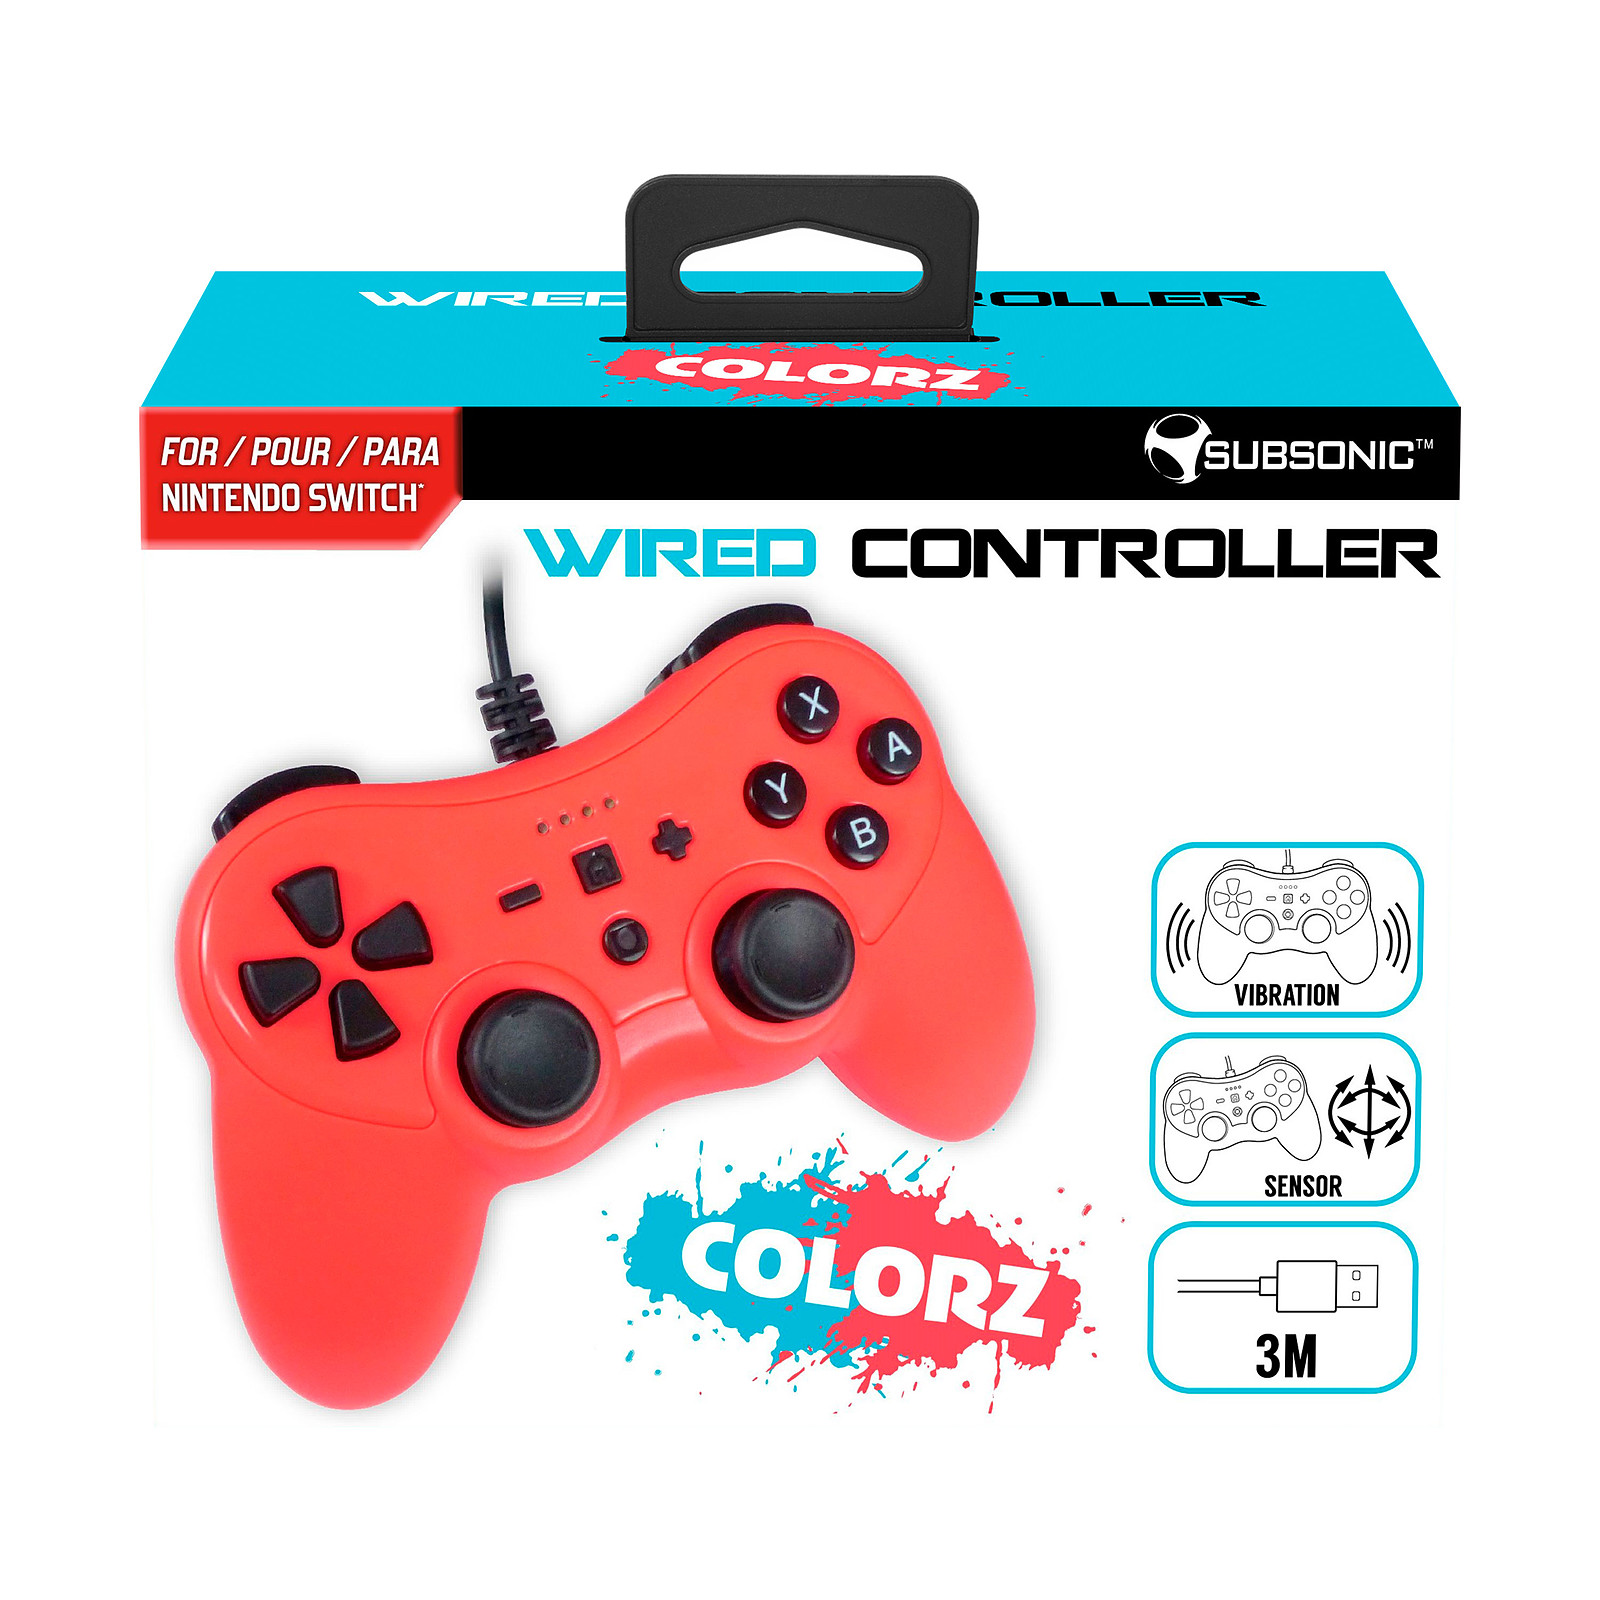 Subsonic Pro S wired controller Colorz Nintendo Switch - Accessoires Switch Subsonic